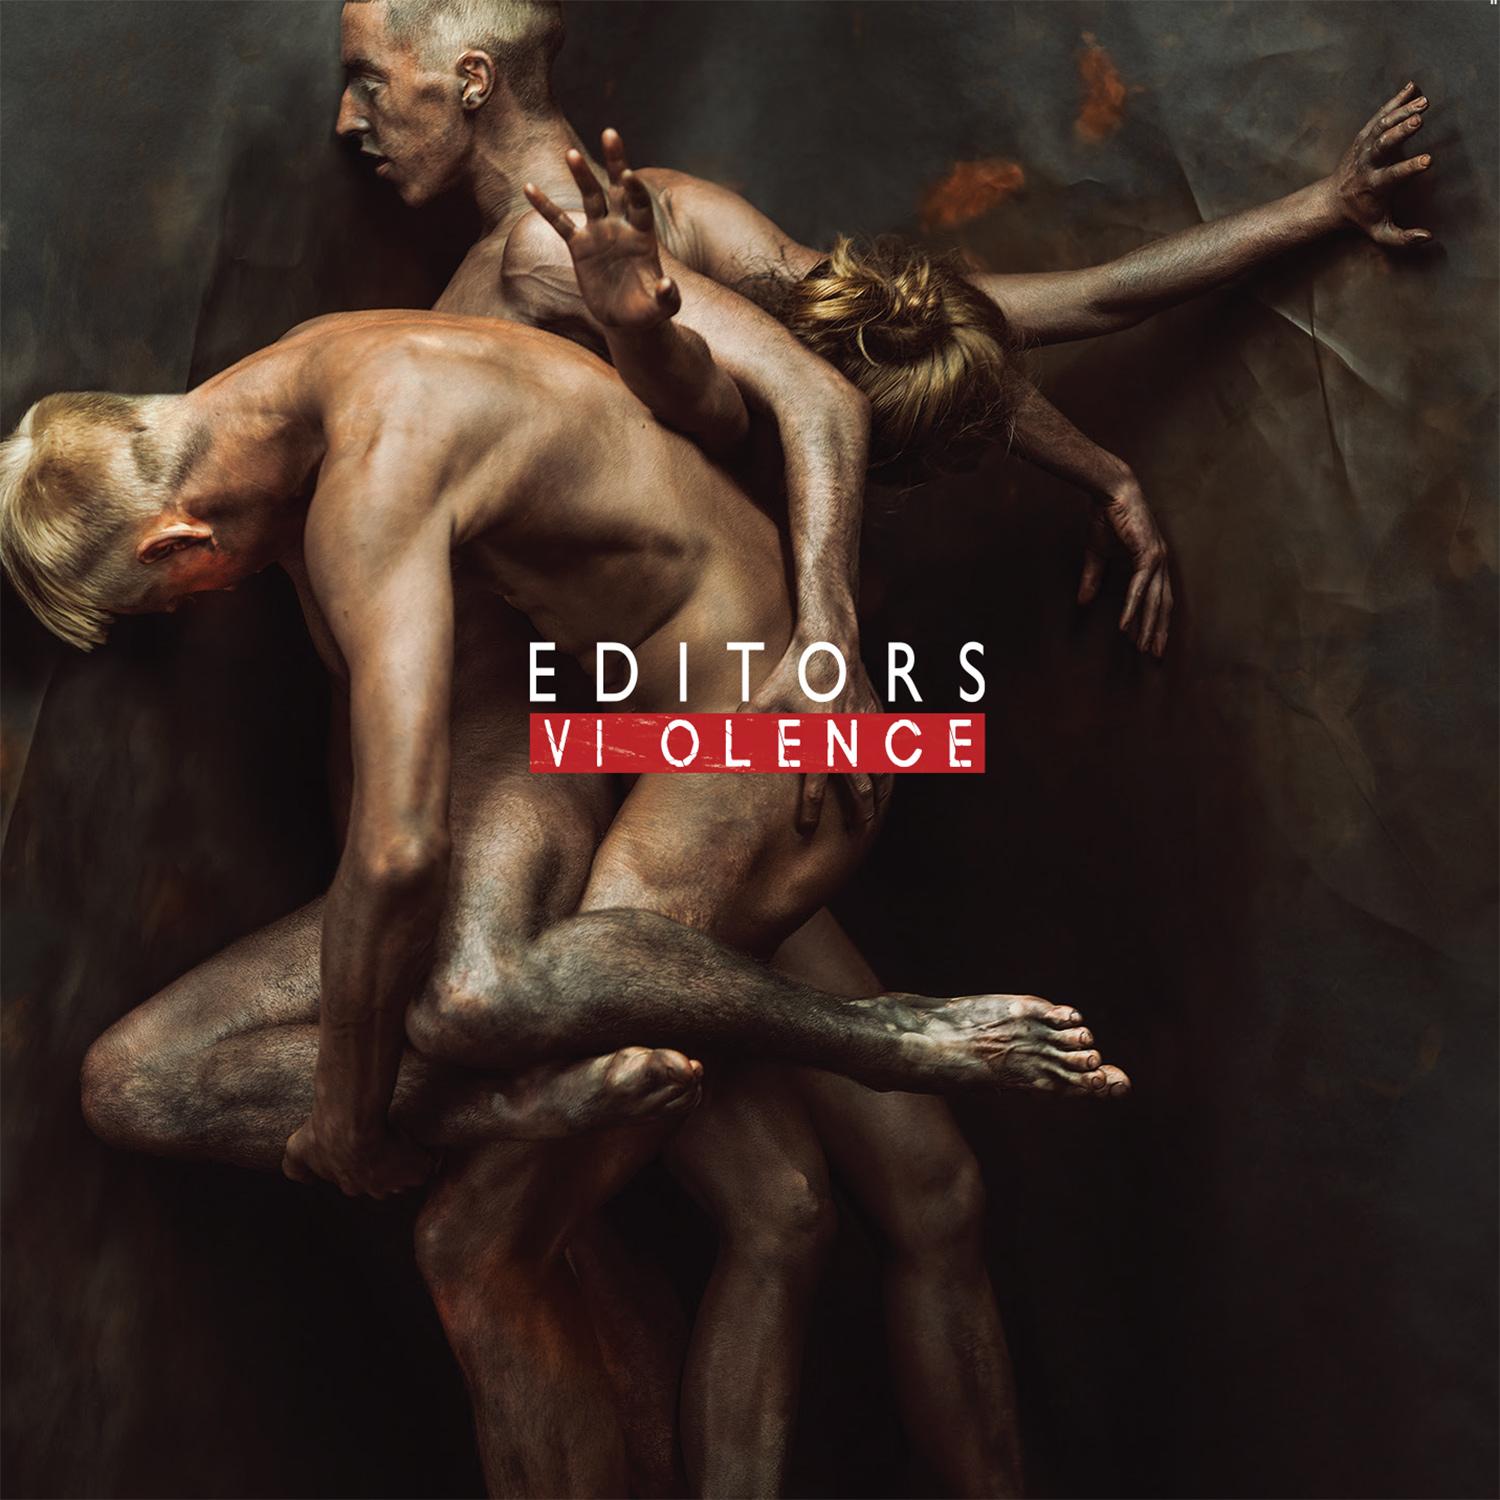 Artwork for ‘Violence’, the new album by Editors